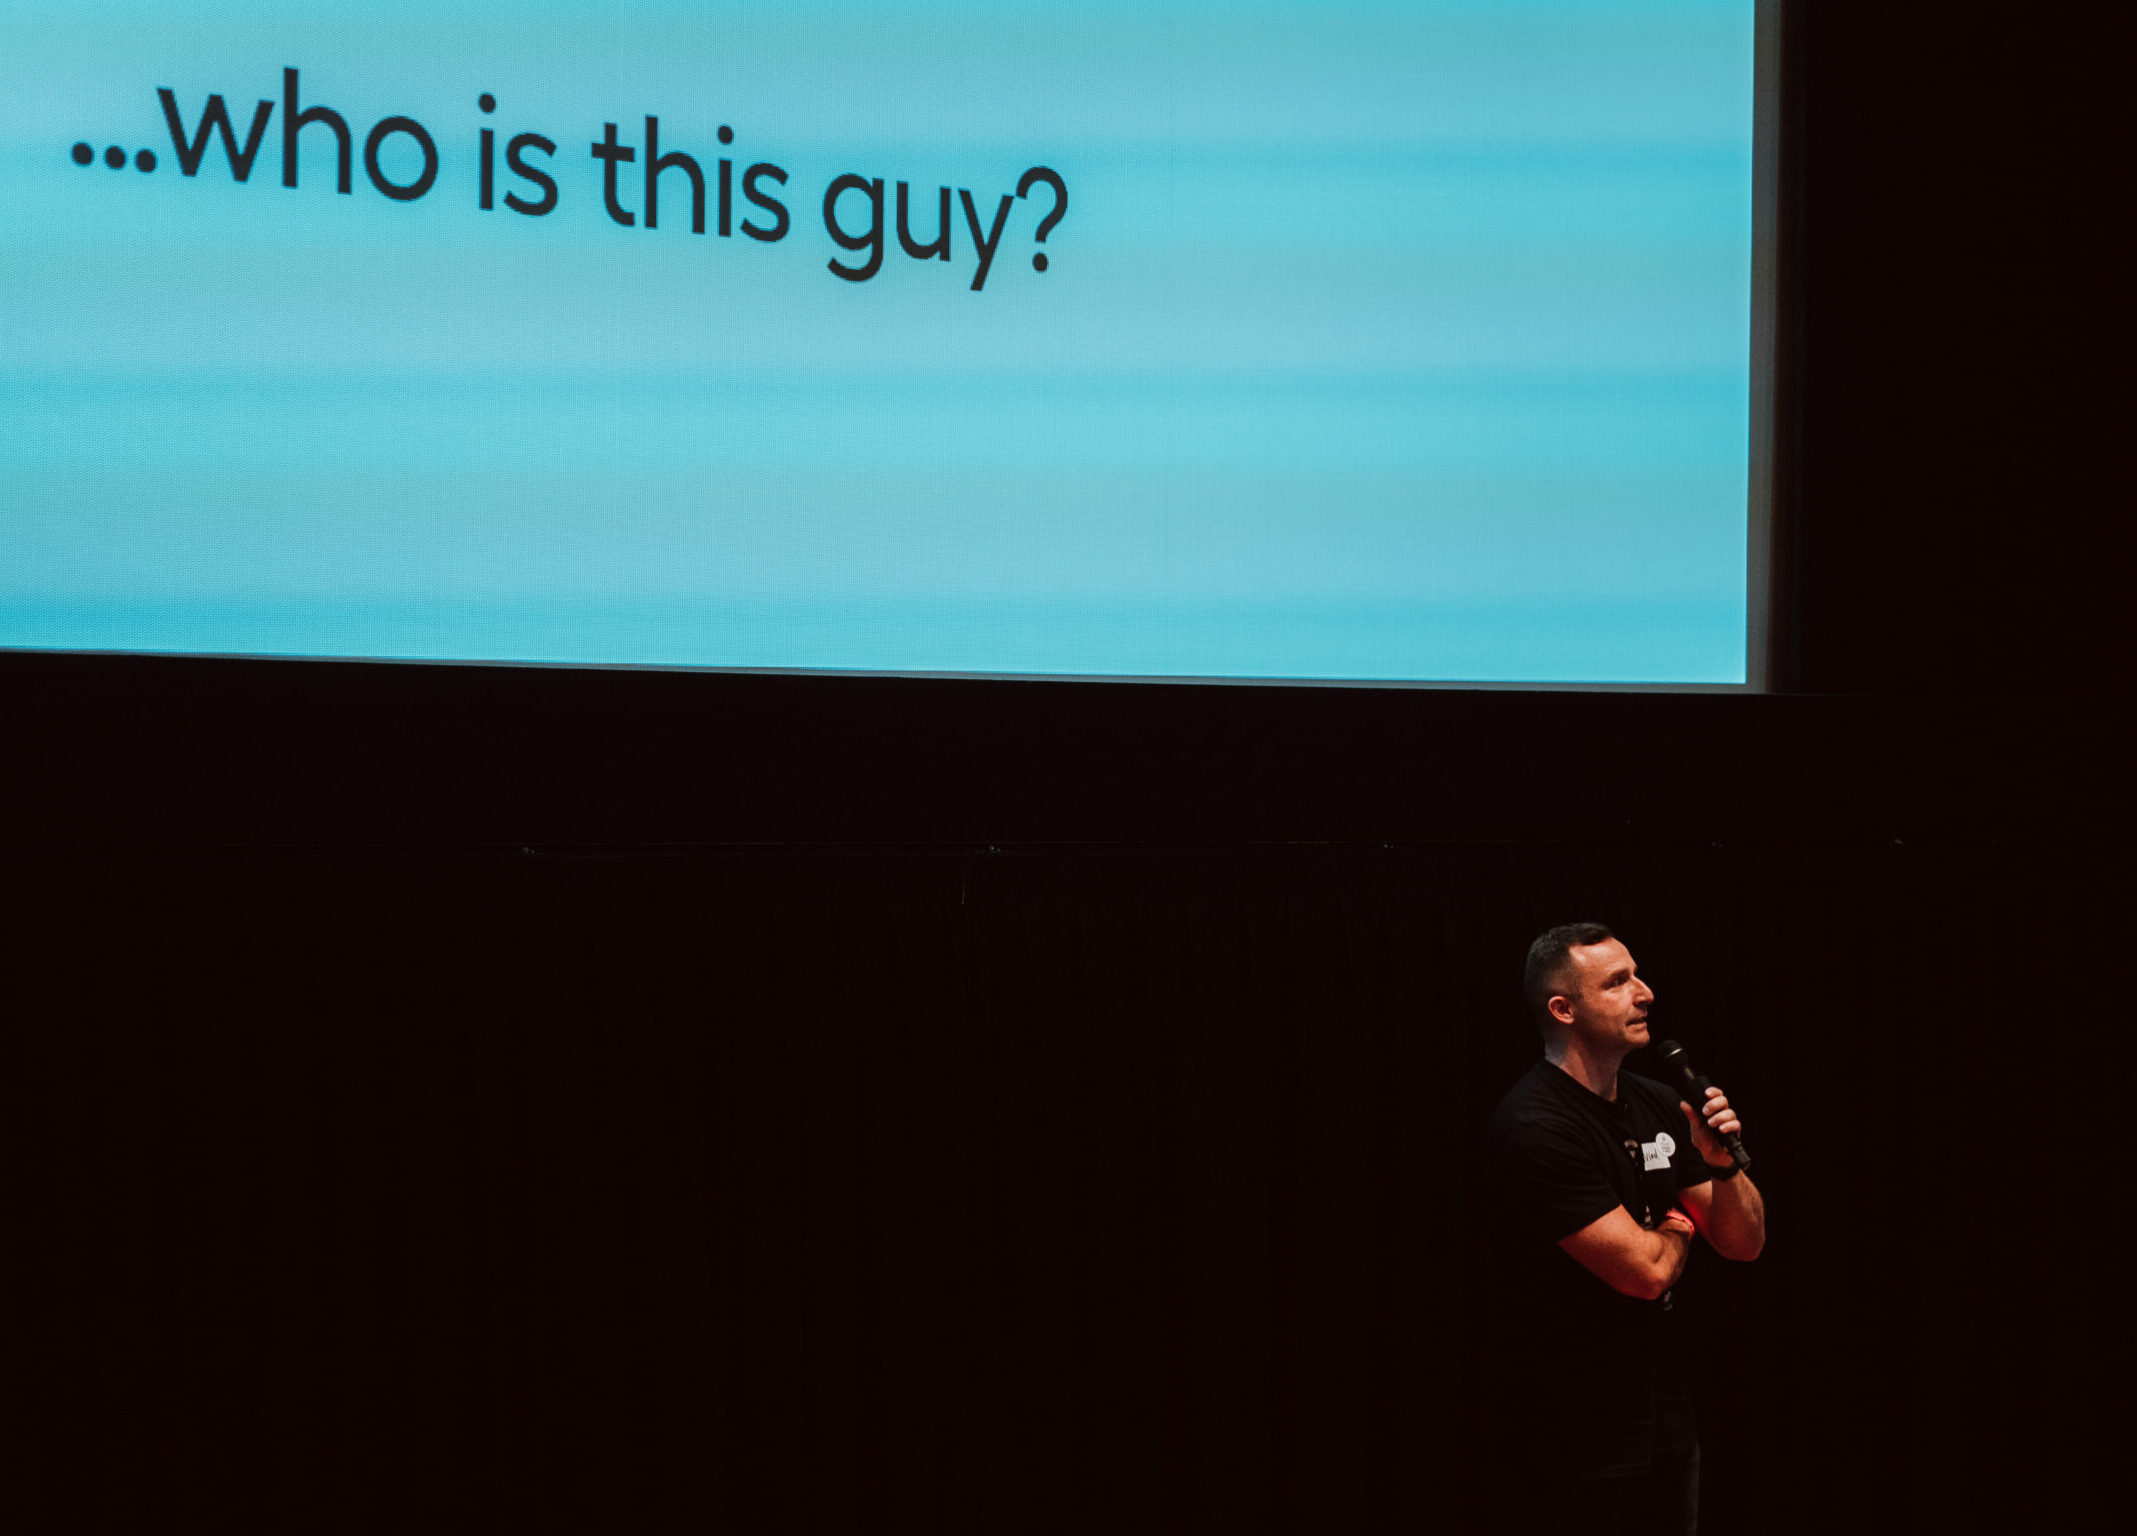 Niaal holding a microphone on stage with screen in the background displaying the text "who is this guy?" on blue.